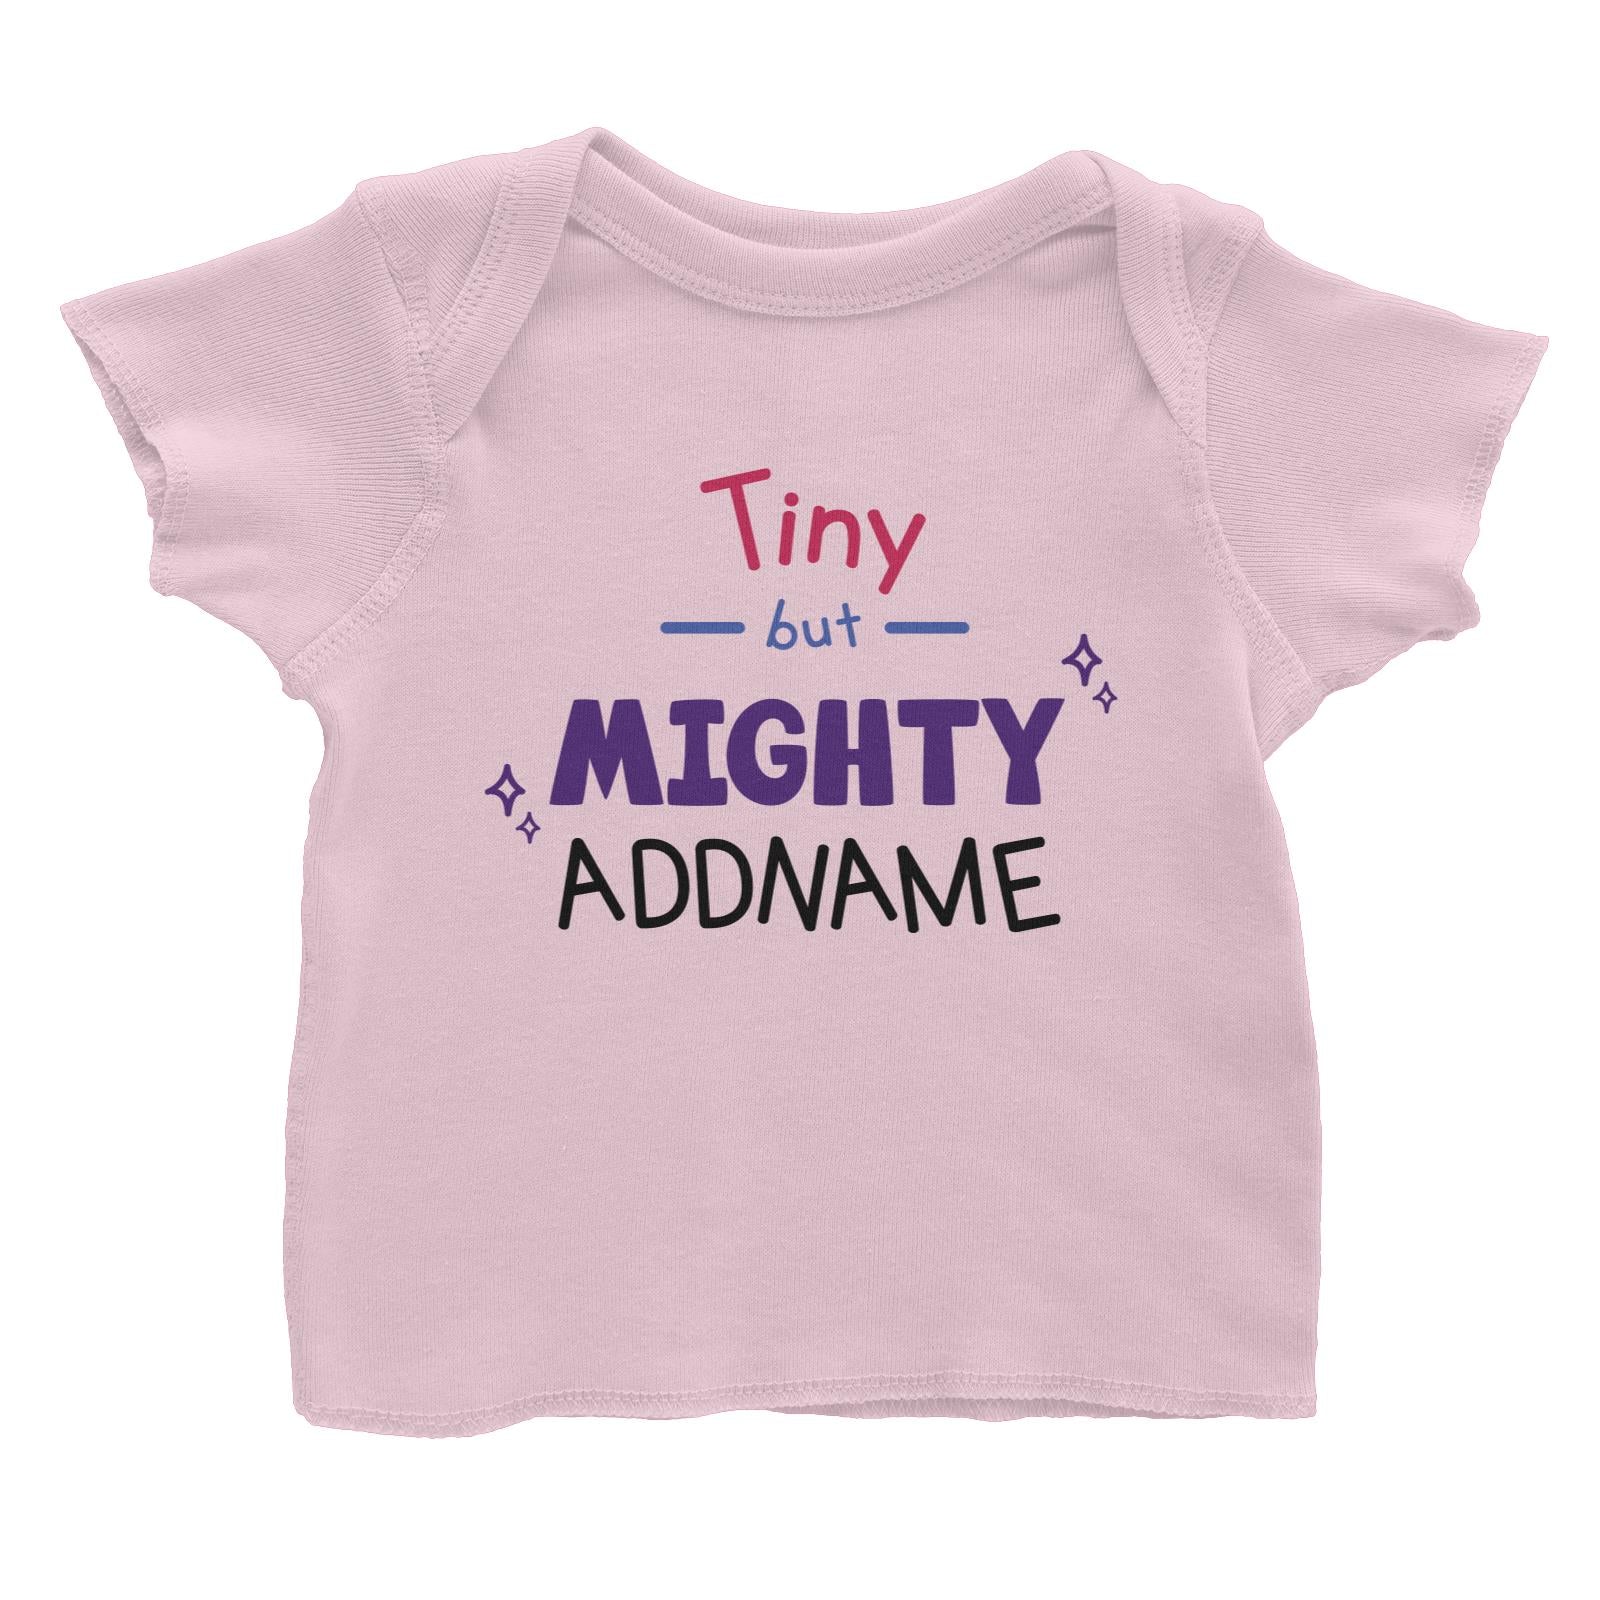 Children's Day Gift Series Tiny But Mighty Addname Baby T-Shirt